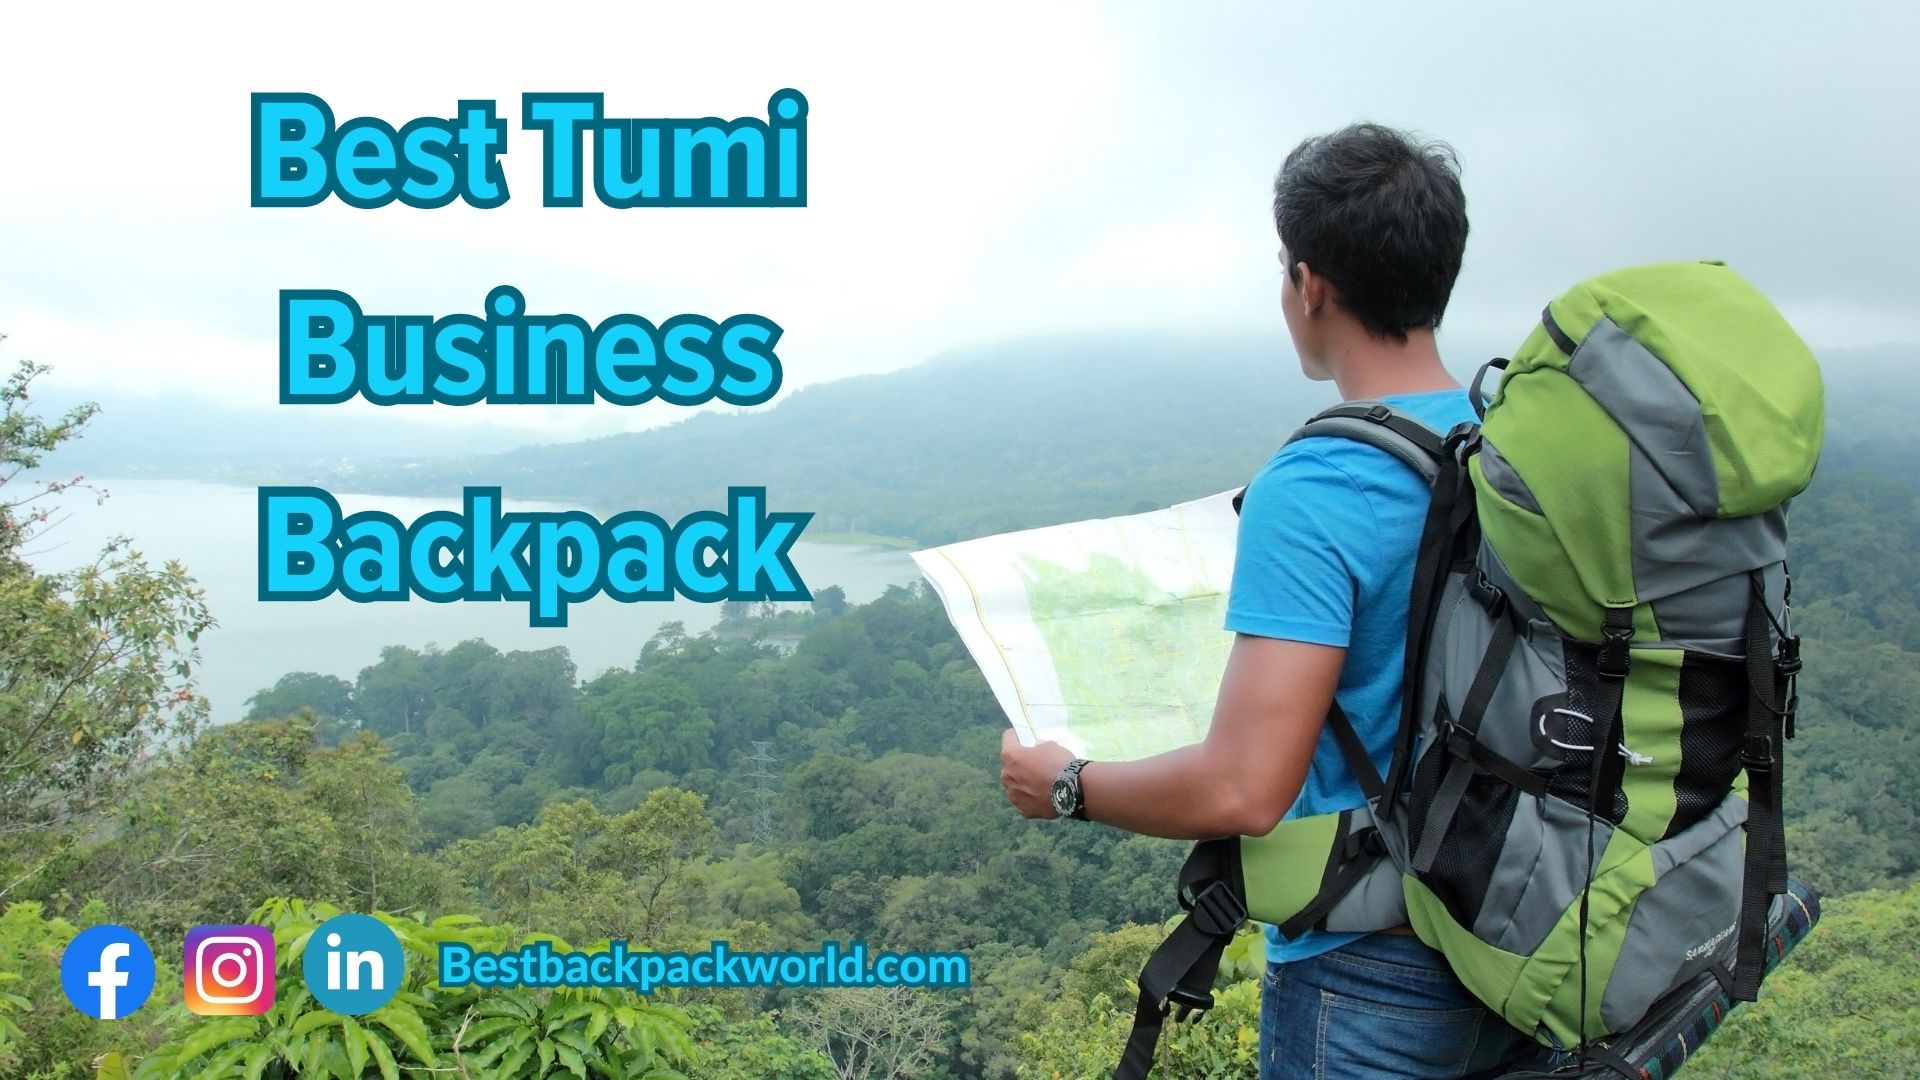 Top 8 Best Tumi Business Backpack in 2023 in 2023 - Expert Review